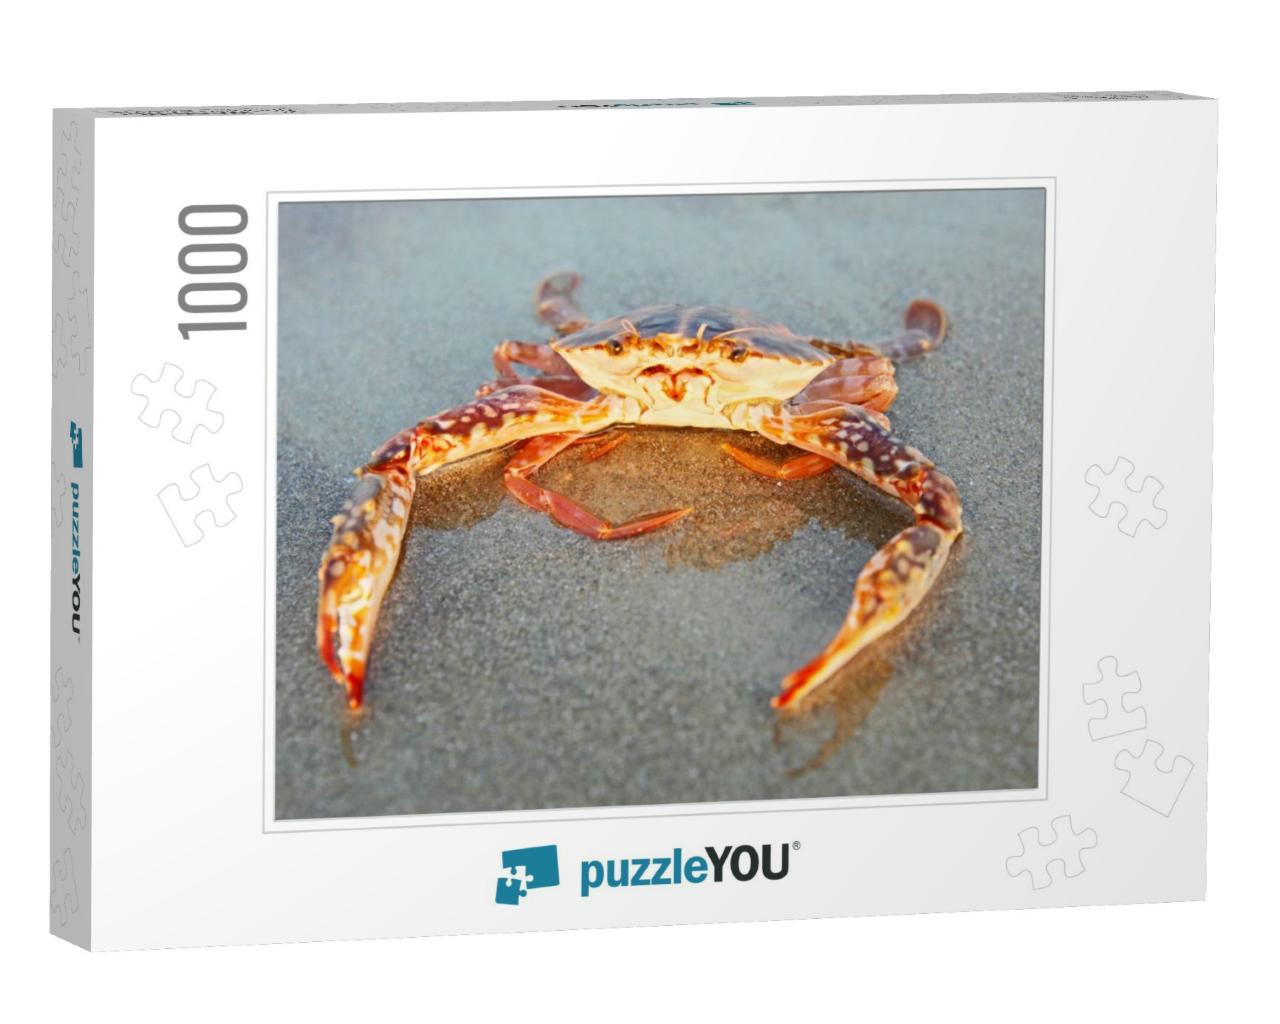 Funny Red Crab Sitting on the Sand Taken in Goa, India... Jigsaw Puzzle with 1000 pieces